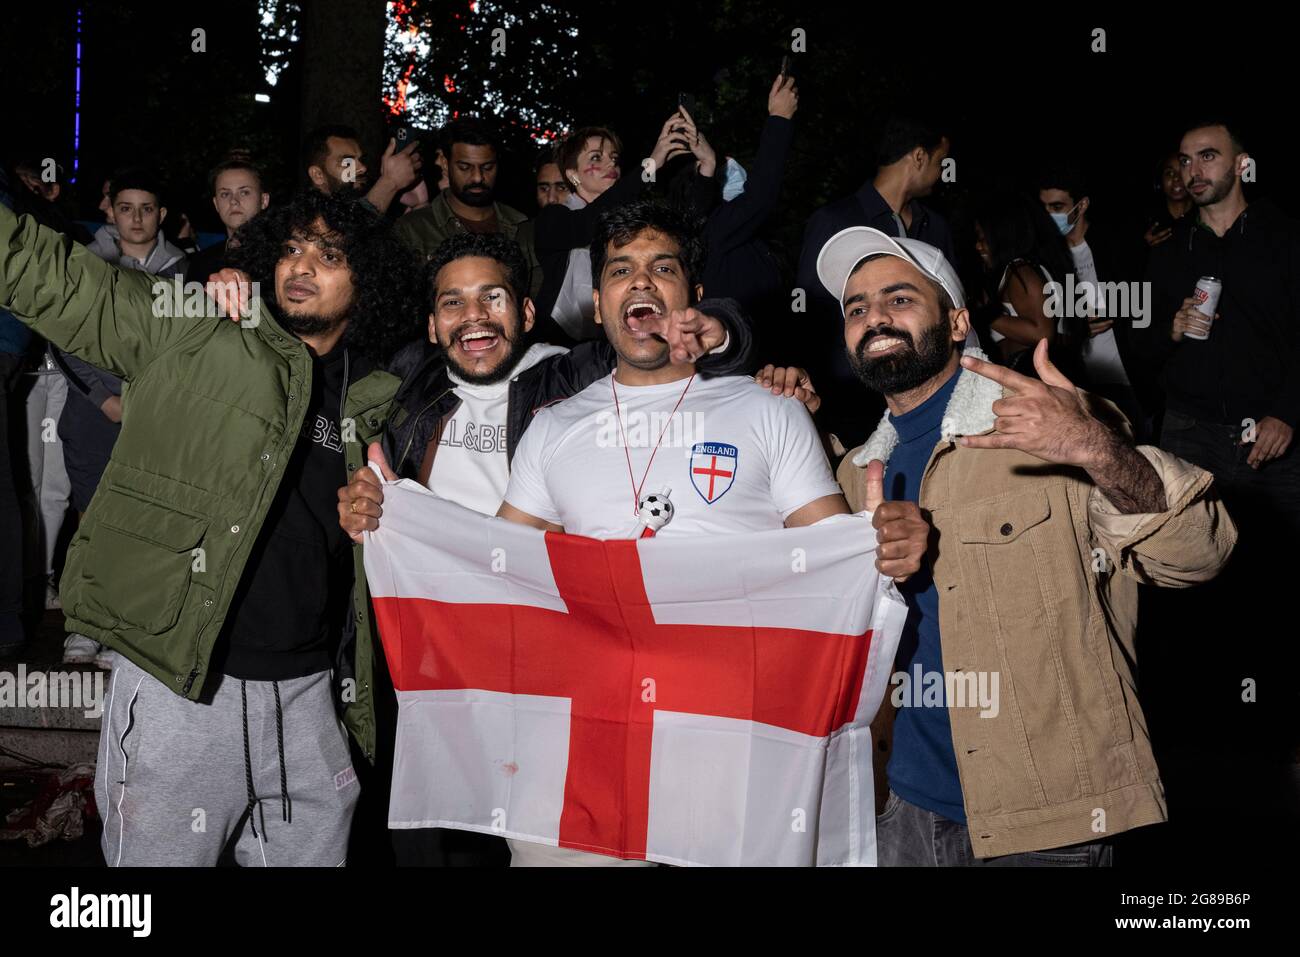 England fans party during the England vs Italy Euro 2020 final, Leicester Square, London, 11 July 2021 Stock Photo